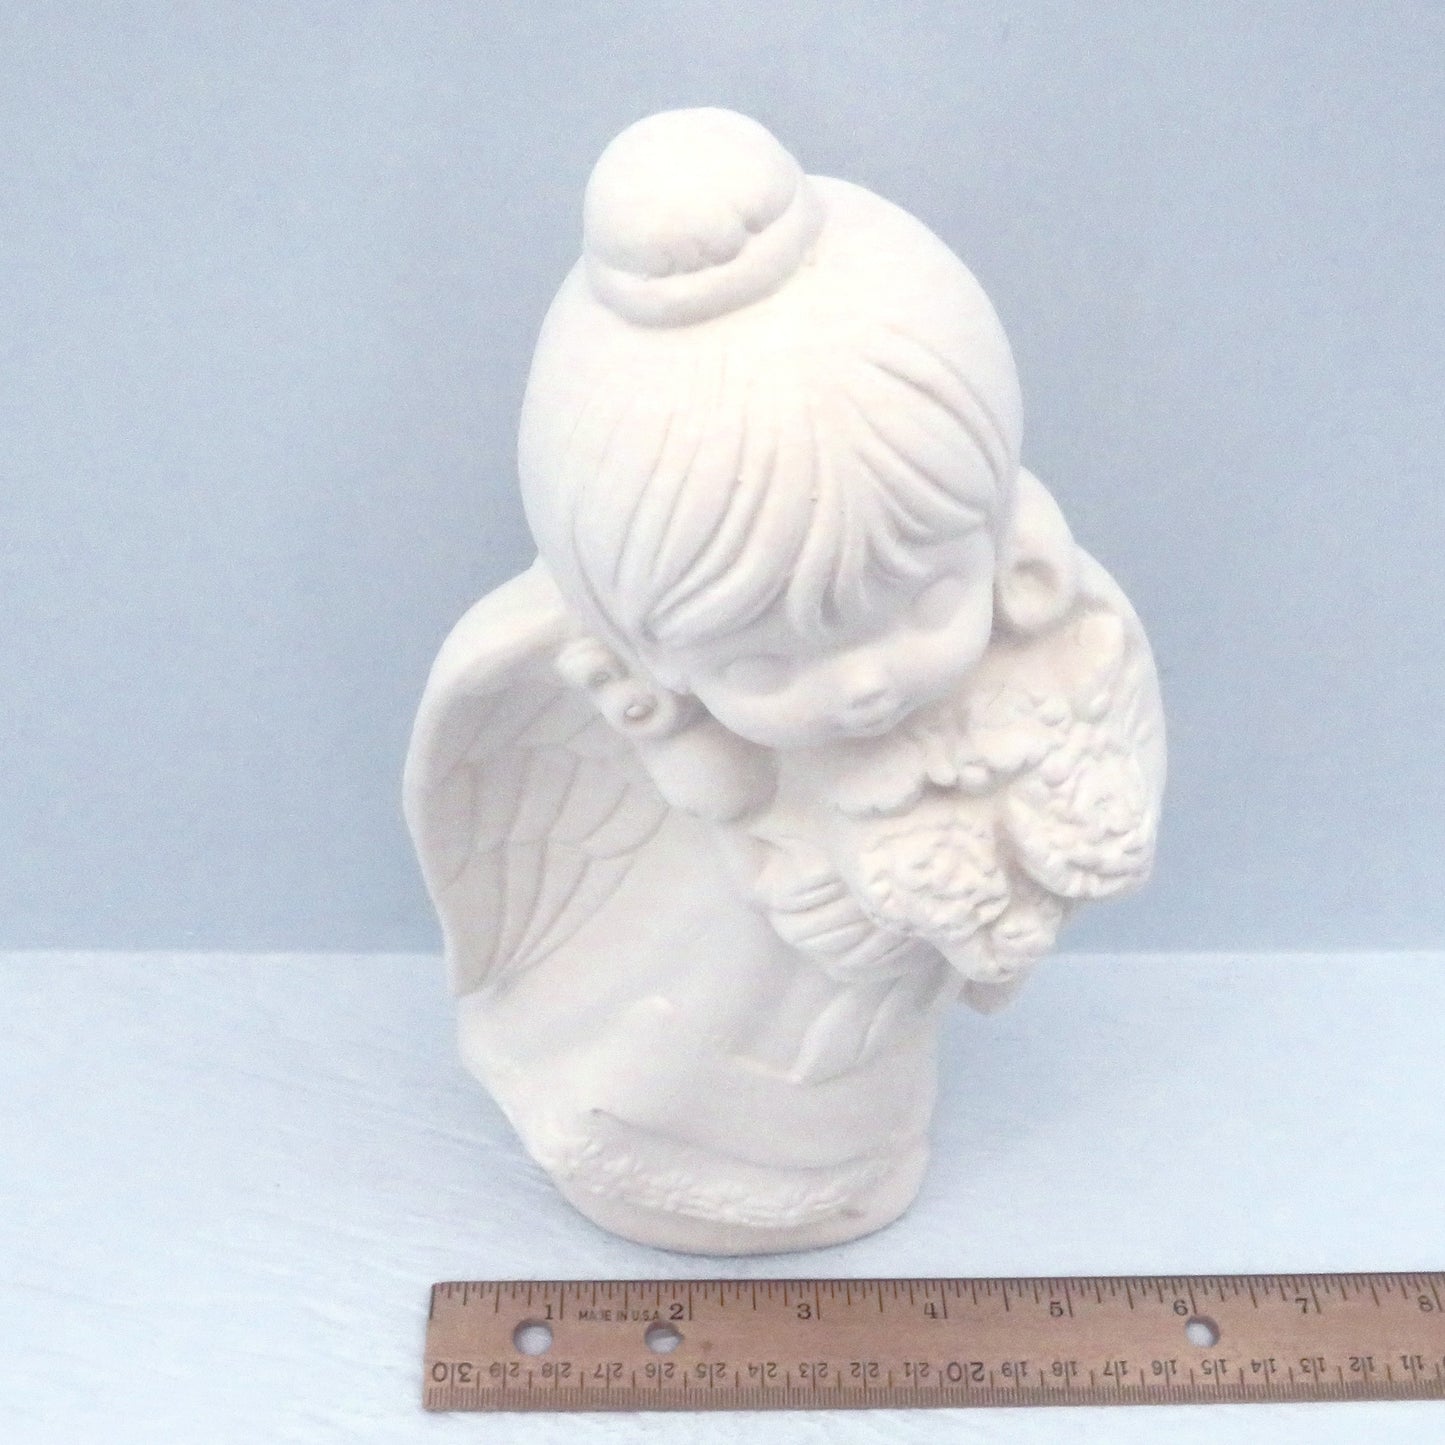 Handmade Ceramic Bisque Owl and Frog Figurines, Unpainted Owl Statue, Ready to Paint Frog Statue, Ceramics to Paint, Owl and Frog Decor